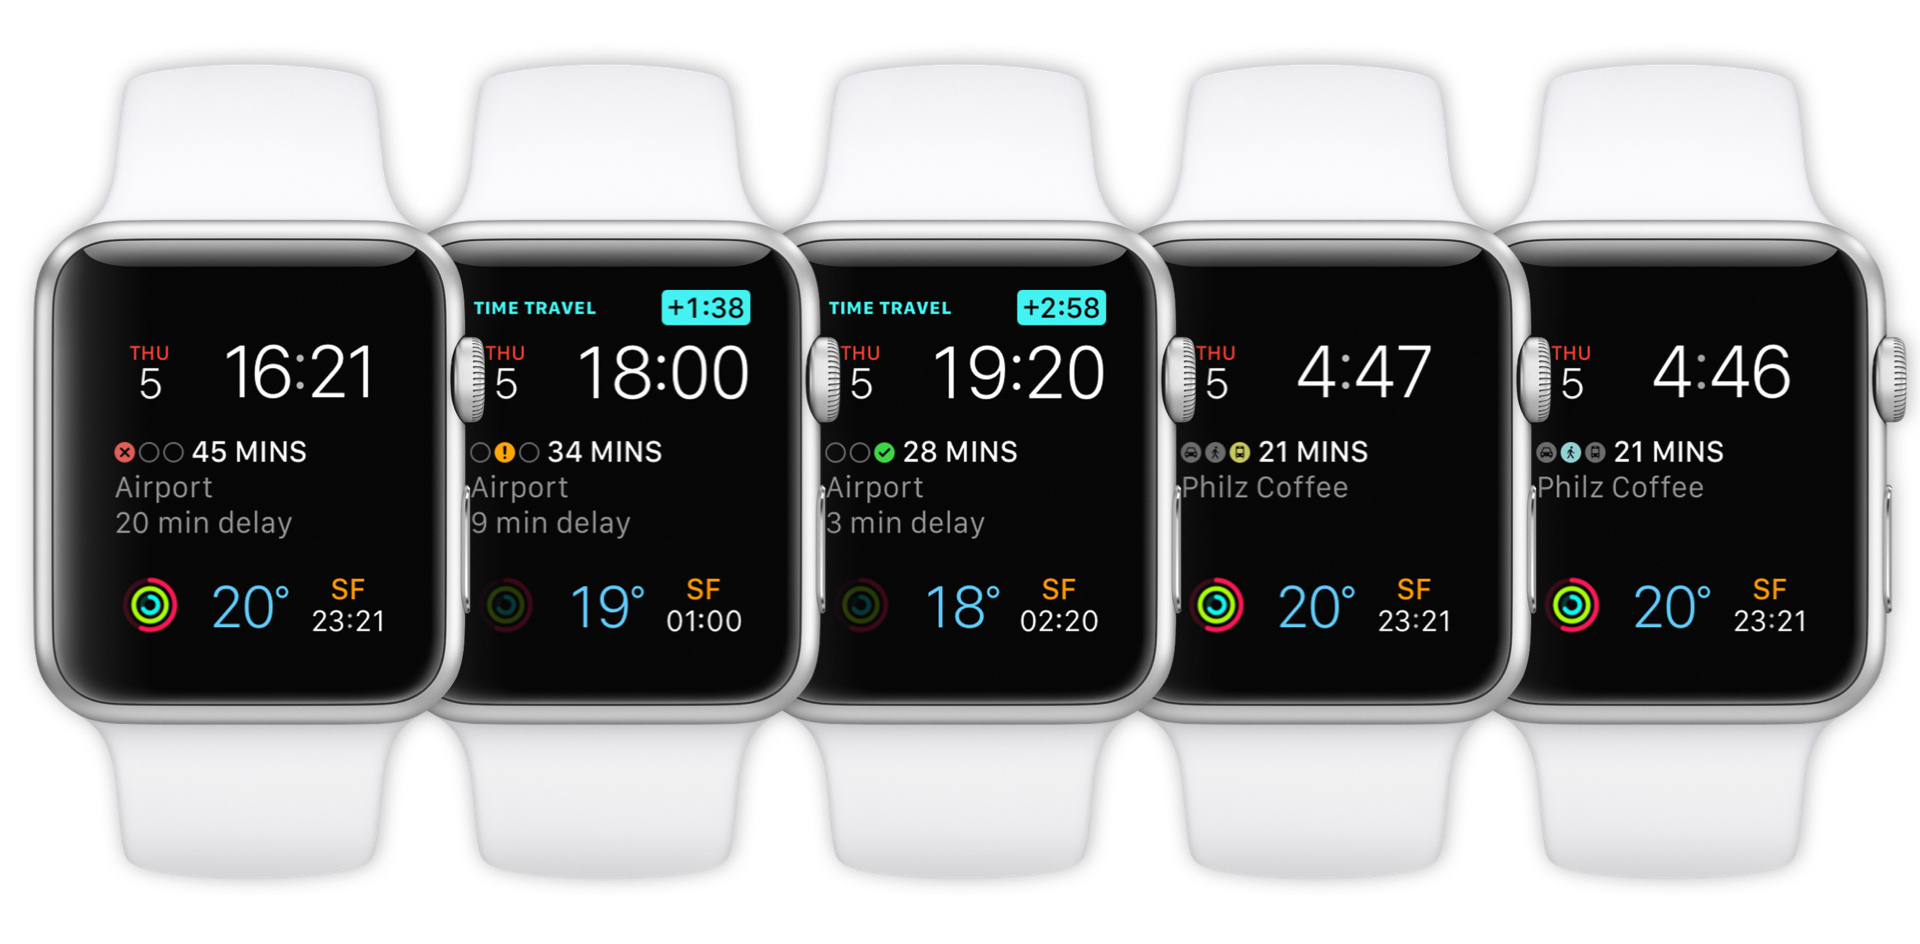 With watchOS 2 ETA introduced travel time on your watch face